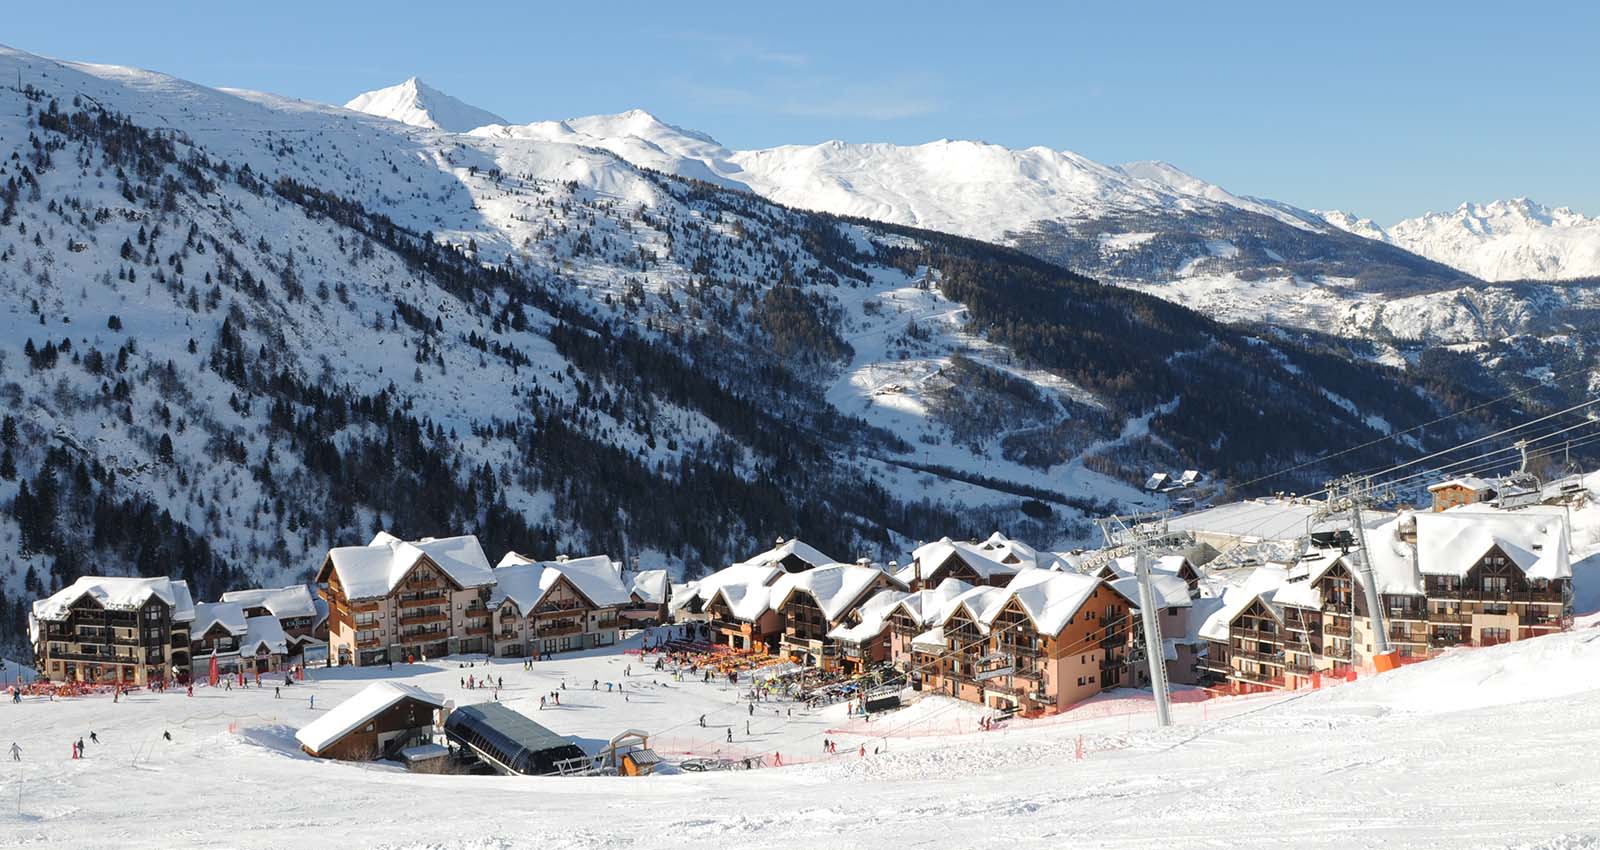 Take your school or group on ski trip to France